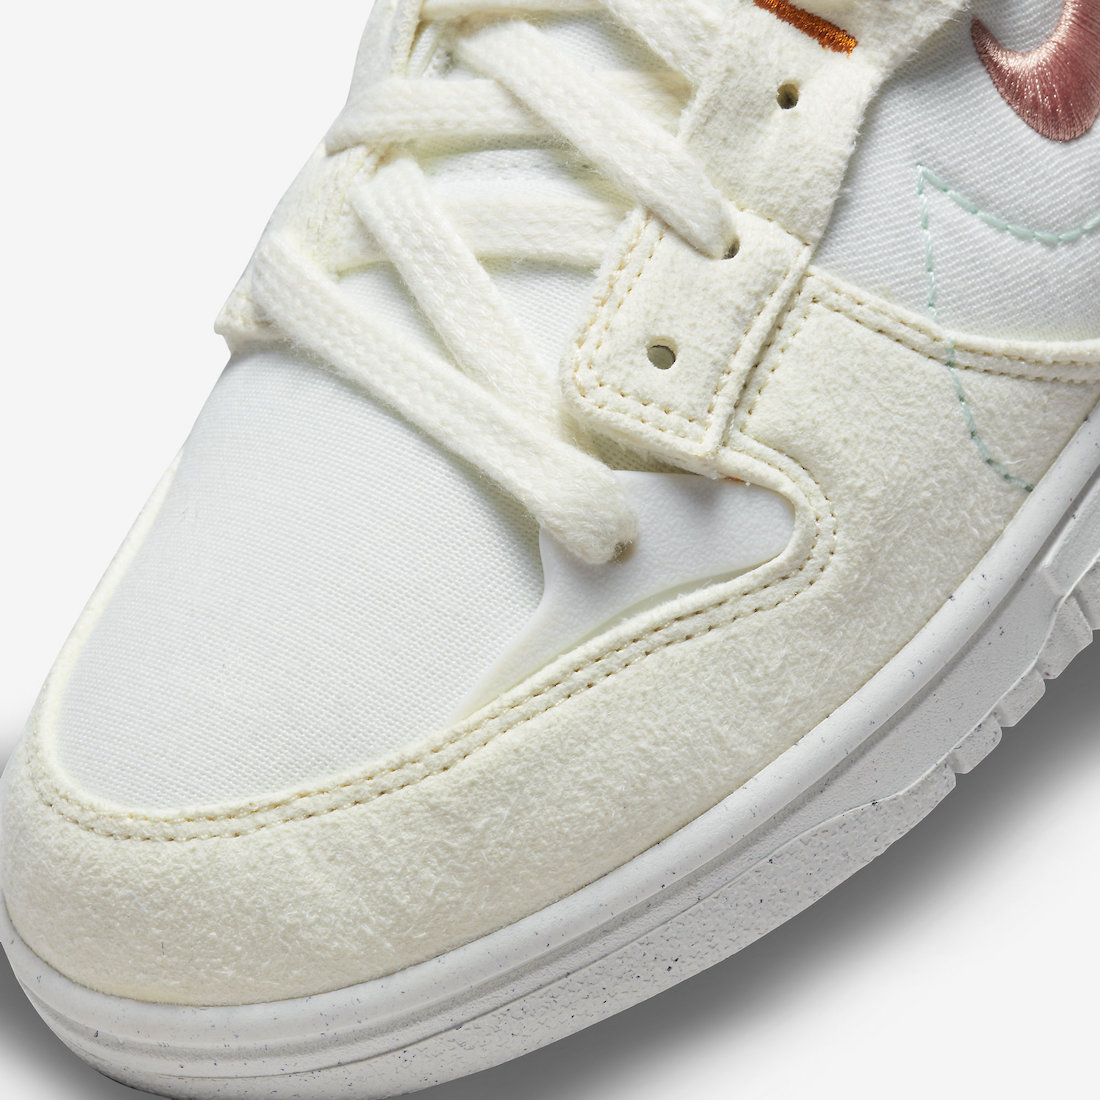 Nike Dunk Low Disrupt 2 Pale Ivory DH4402-100 Release Date